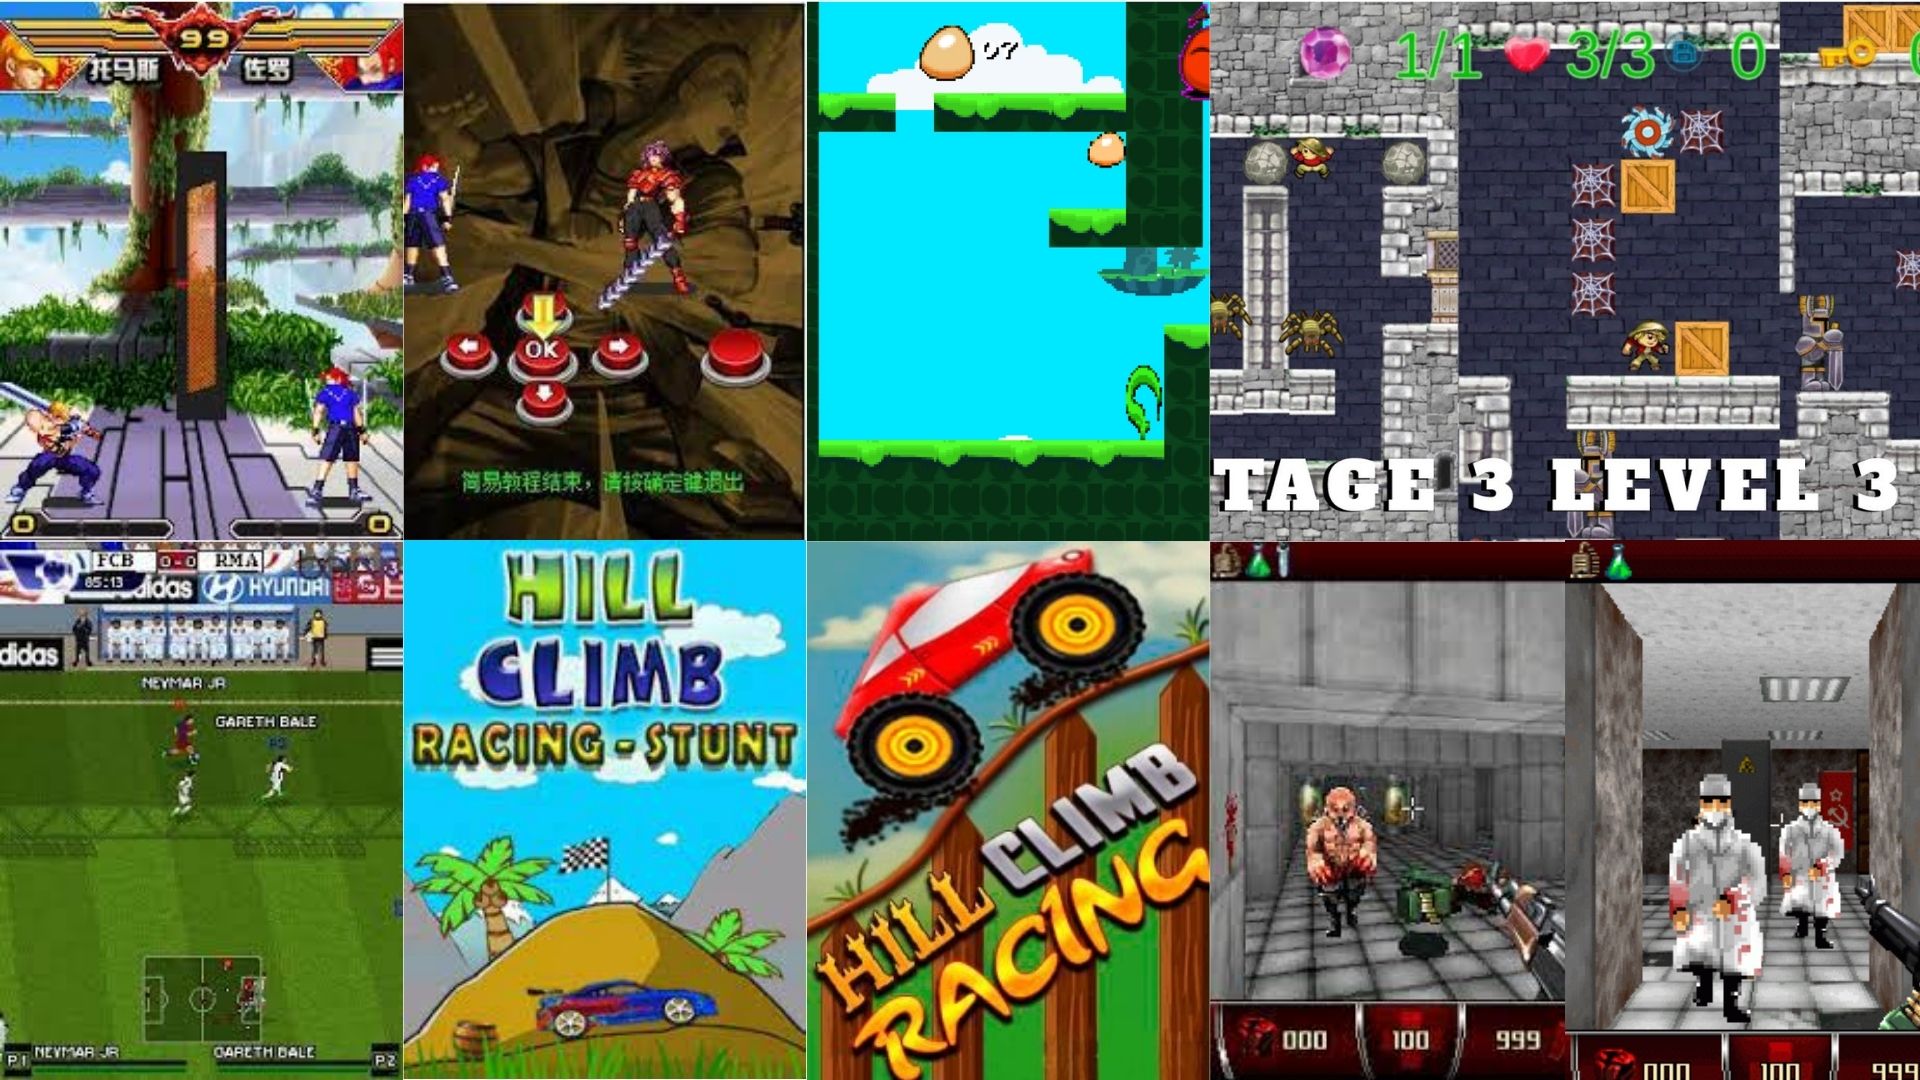 Nokia java games we can't forget: